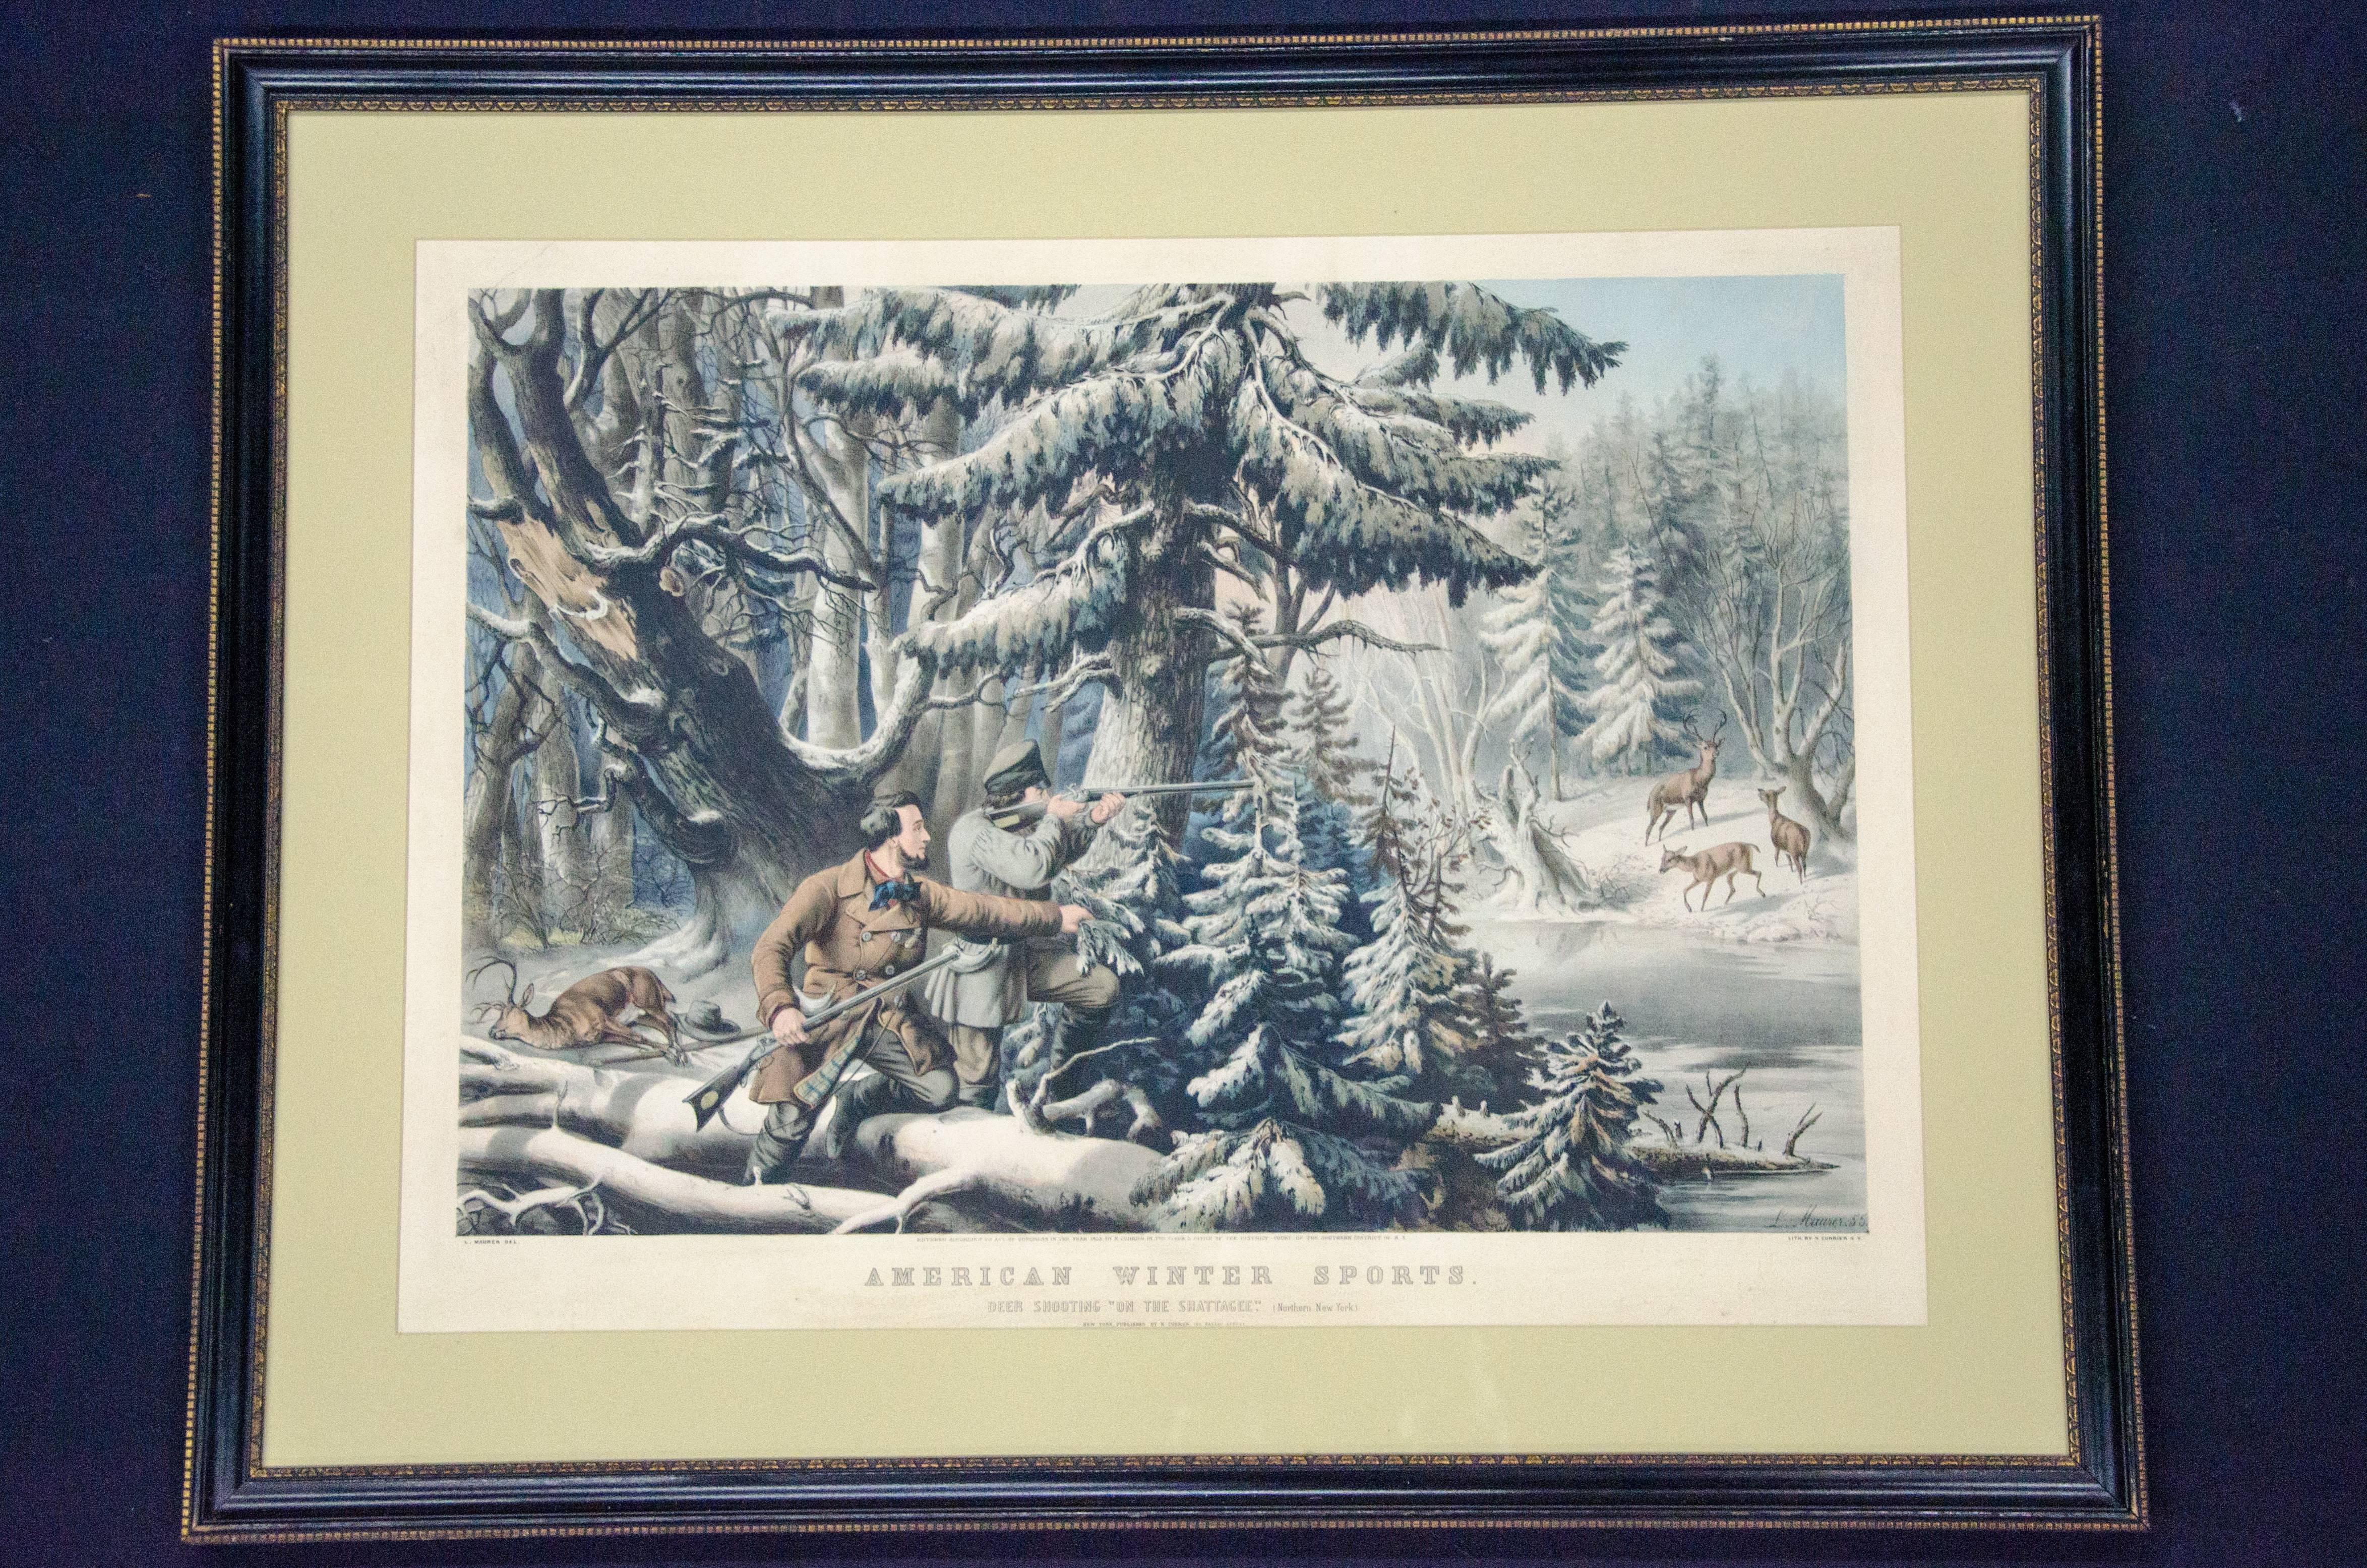 Lithograph by Currier & Ives (after painting by L Maurer). One of the 